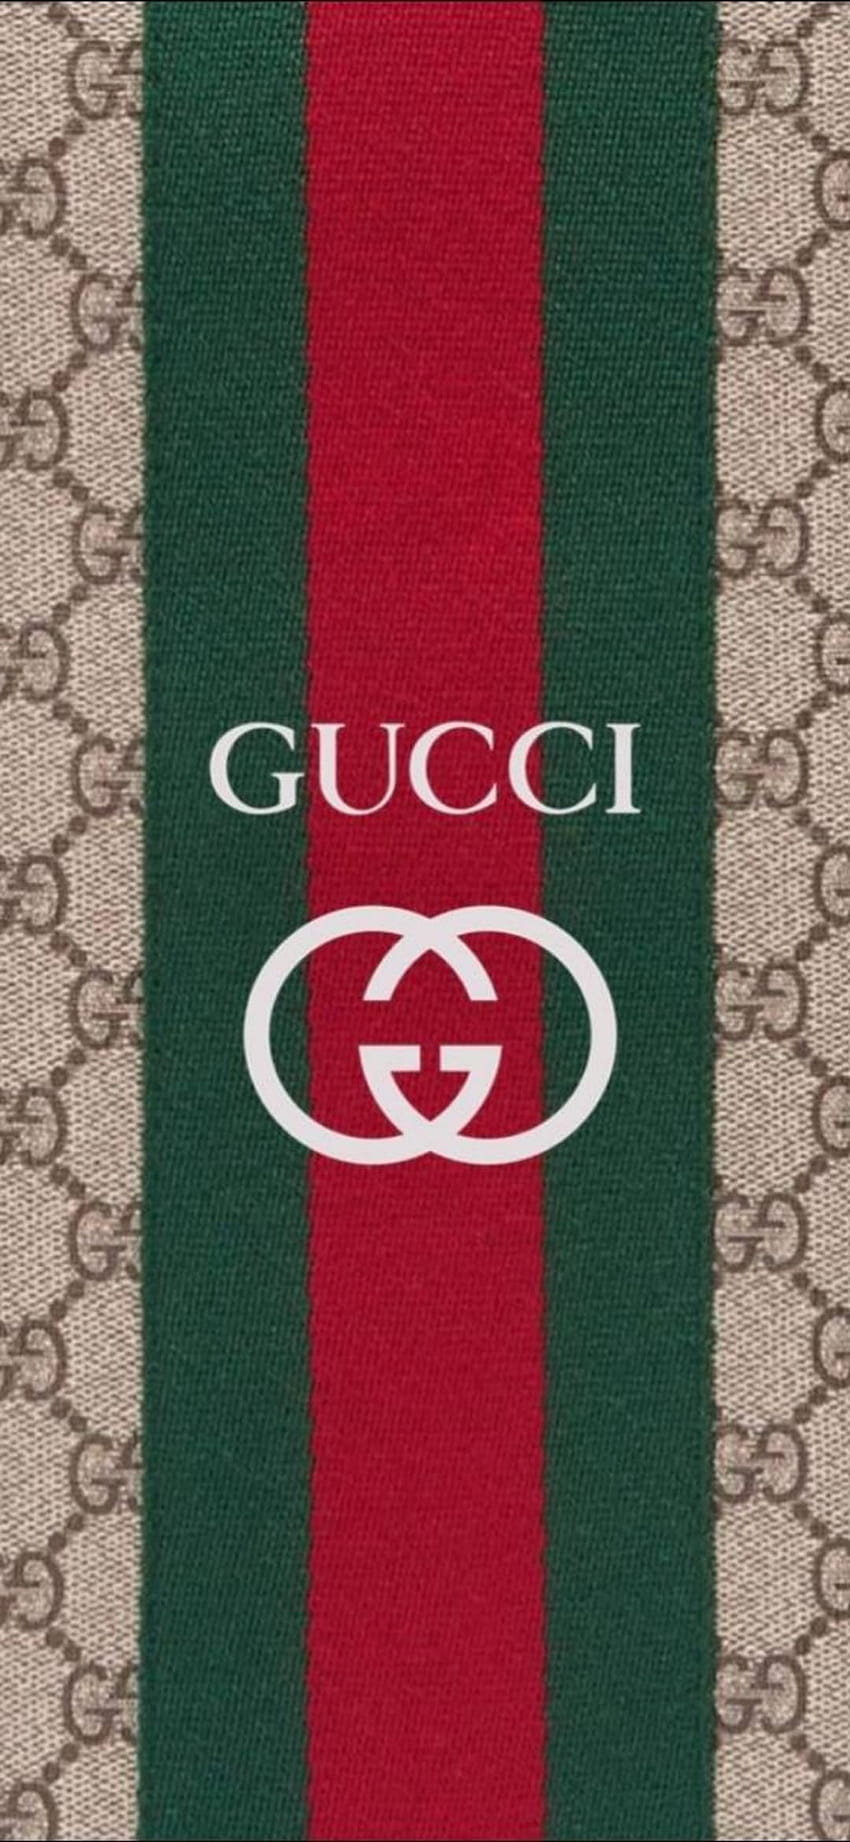 gucci backgrounds Off 66%, red gucci HD phone wallpaper